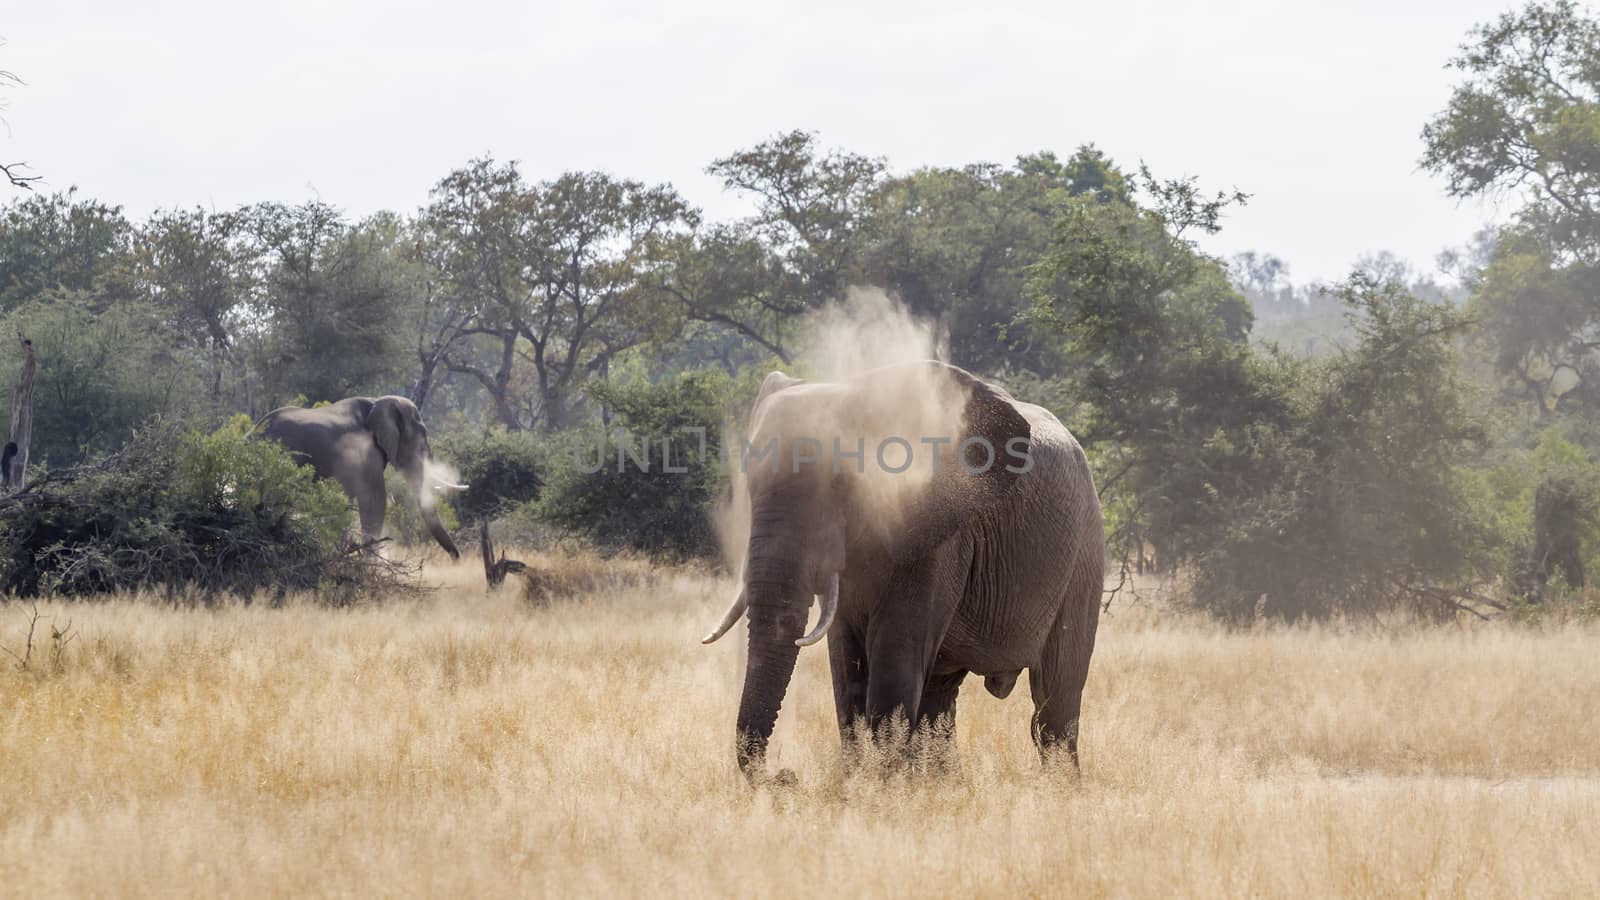 African bush elephant spreading dust in backlit in Kruger National park, South Africa ; Specie Loxodonta africana family of Elephantidae